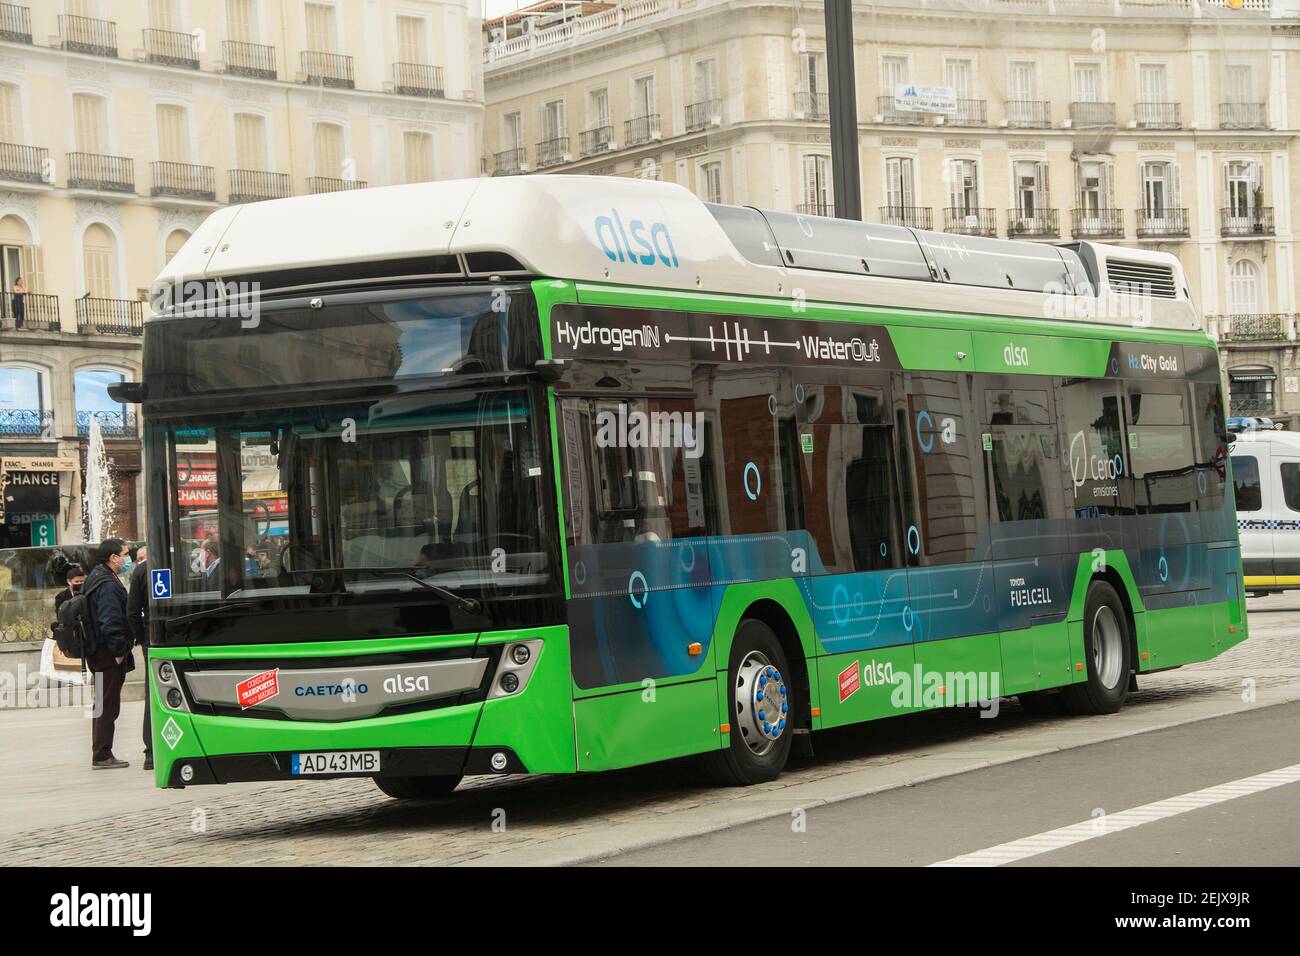 The Community of Madrid has presented this Monday the first hydrogen bus that will circulate in Spain, a vehicle that uses an electric propulsion system with a fuel cell powered by hydrogen. It is 'an innovative technology with zero CO2 emissions and guarantees autonomy that allows the bus to operate on a standard urban line without stoppages. At the event, in Puerta del Sol, the regional president, Isabel Díaz Ayuso, the Minister of Transport, Mobility and Infrastructure, Ángel Garrido, and the President of Alsa, Jorge Cosmen. 'Today the Community of Madrid begins to test the transport of the Stock Photo